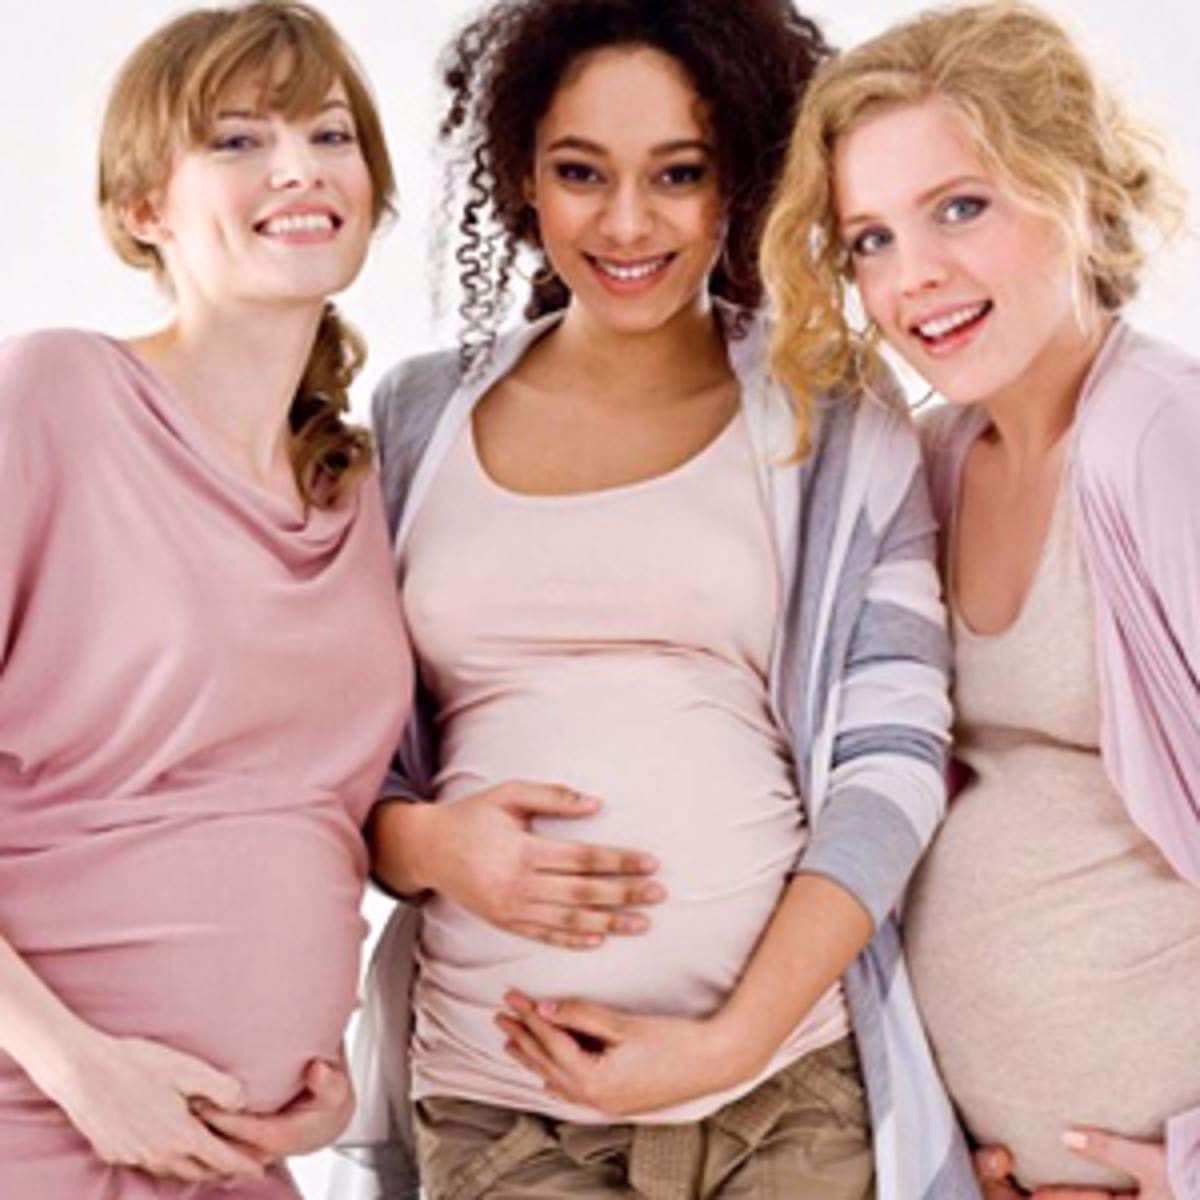 Pregnancies Are Contagious Between Colleagues